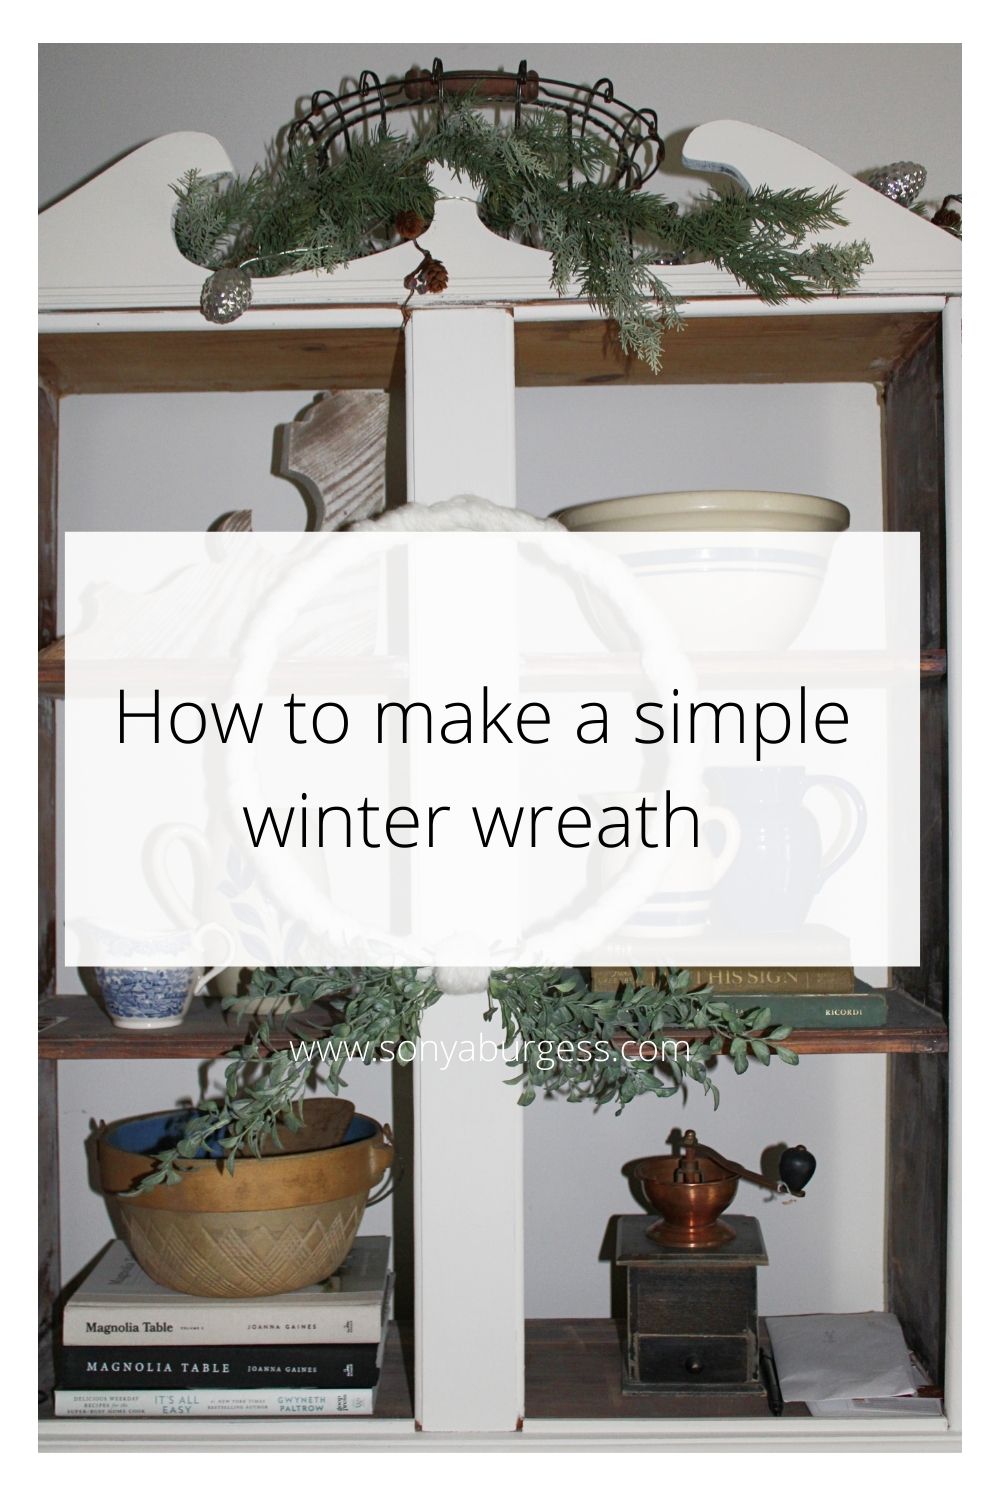 How to create a simple winter wreath